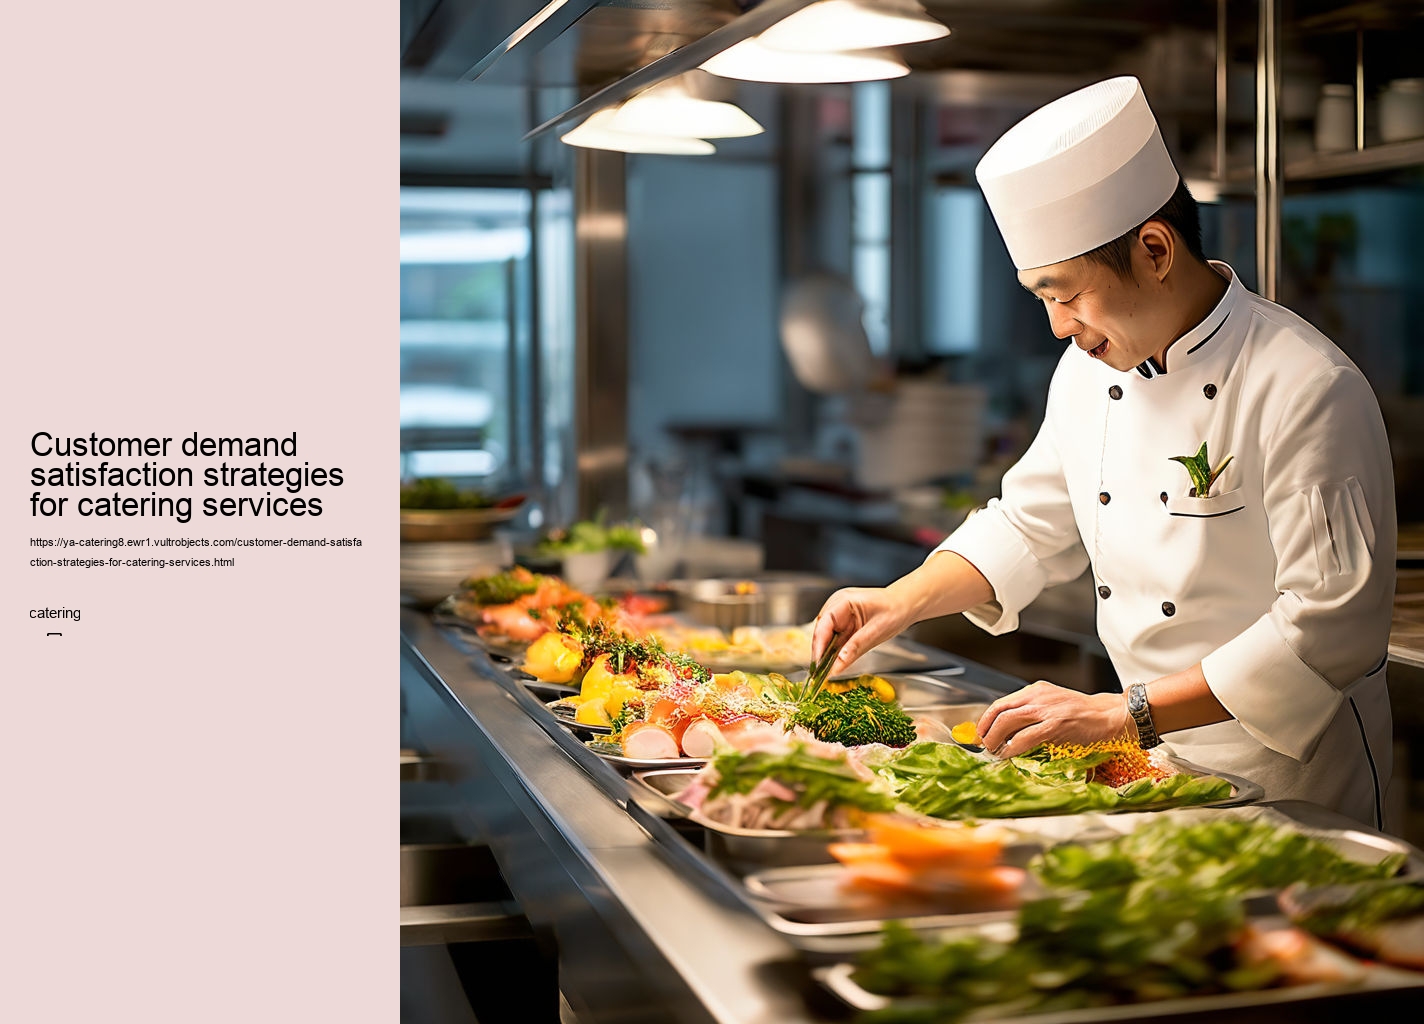 Customer demand satisfaction strategies for catering services